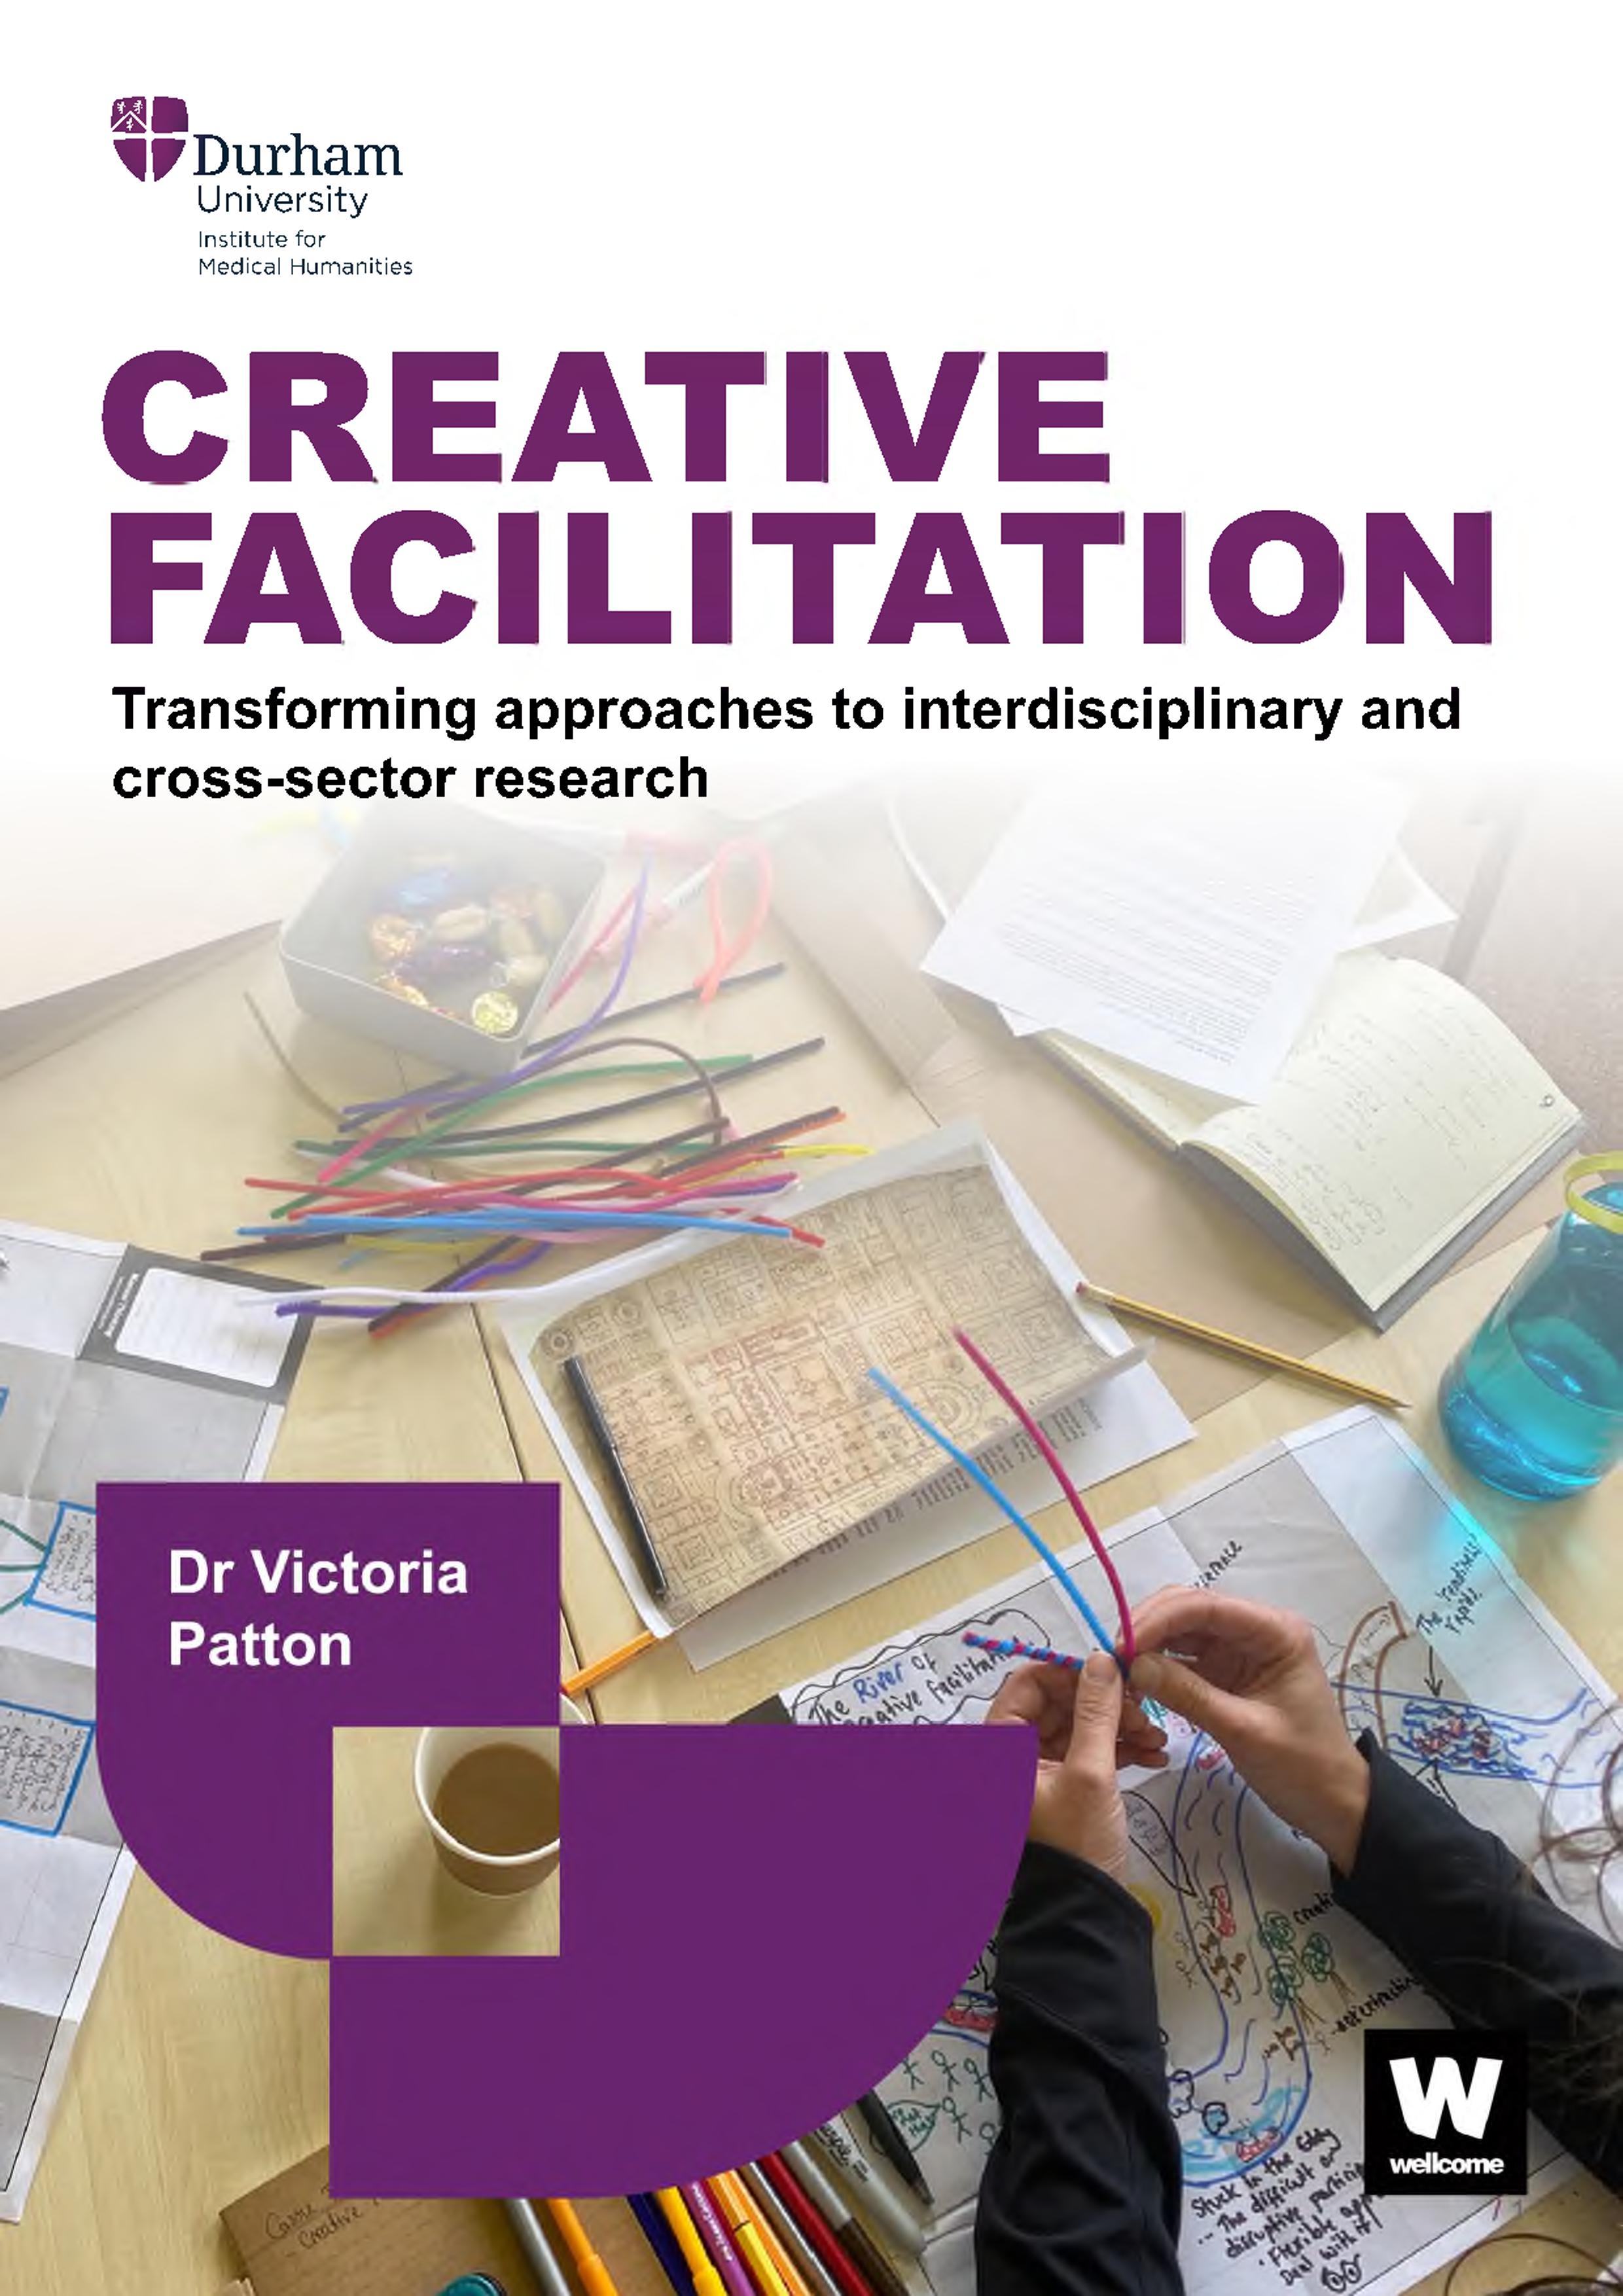 Image of front page of Creative facilitation report